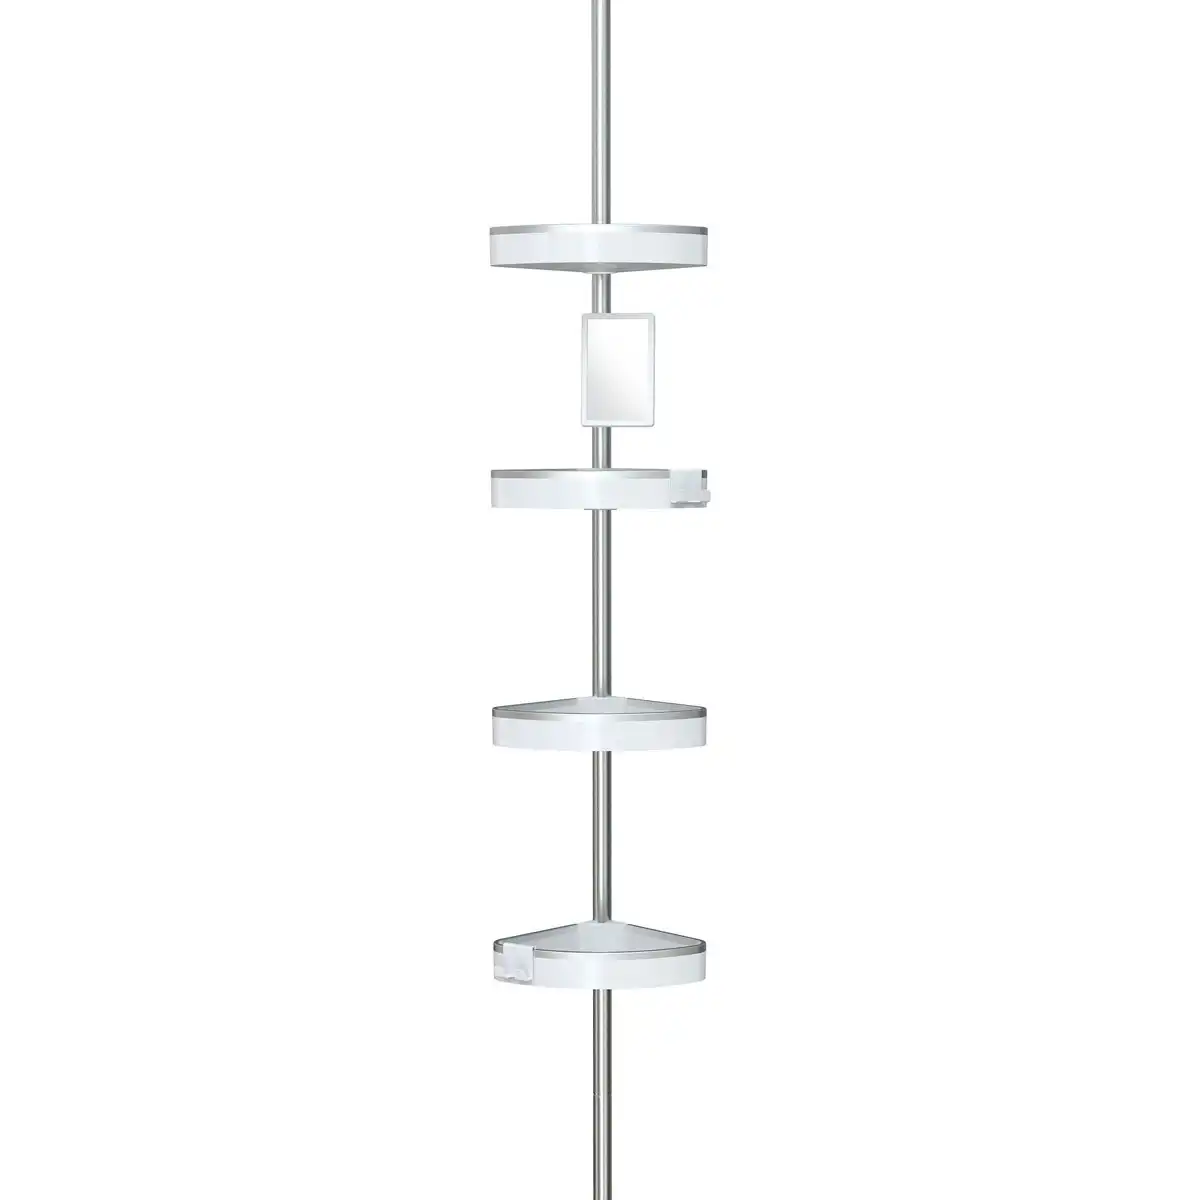 Better Living HiRise 4 Tension Shower Caddy with Mirror - White/Aluminium